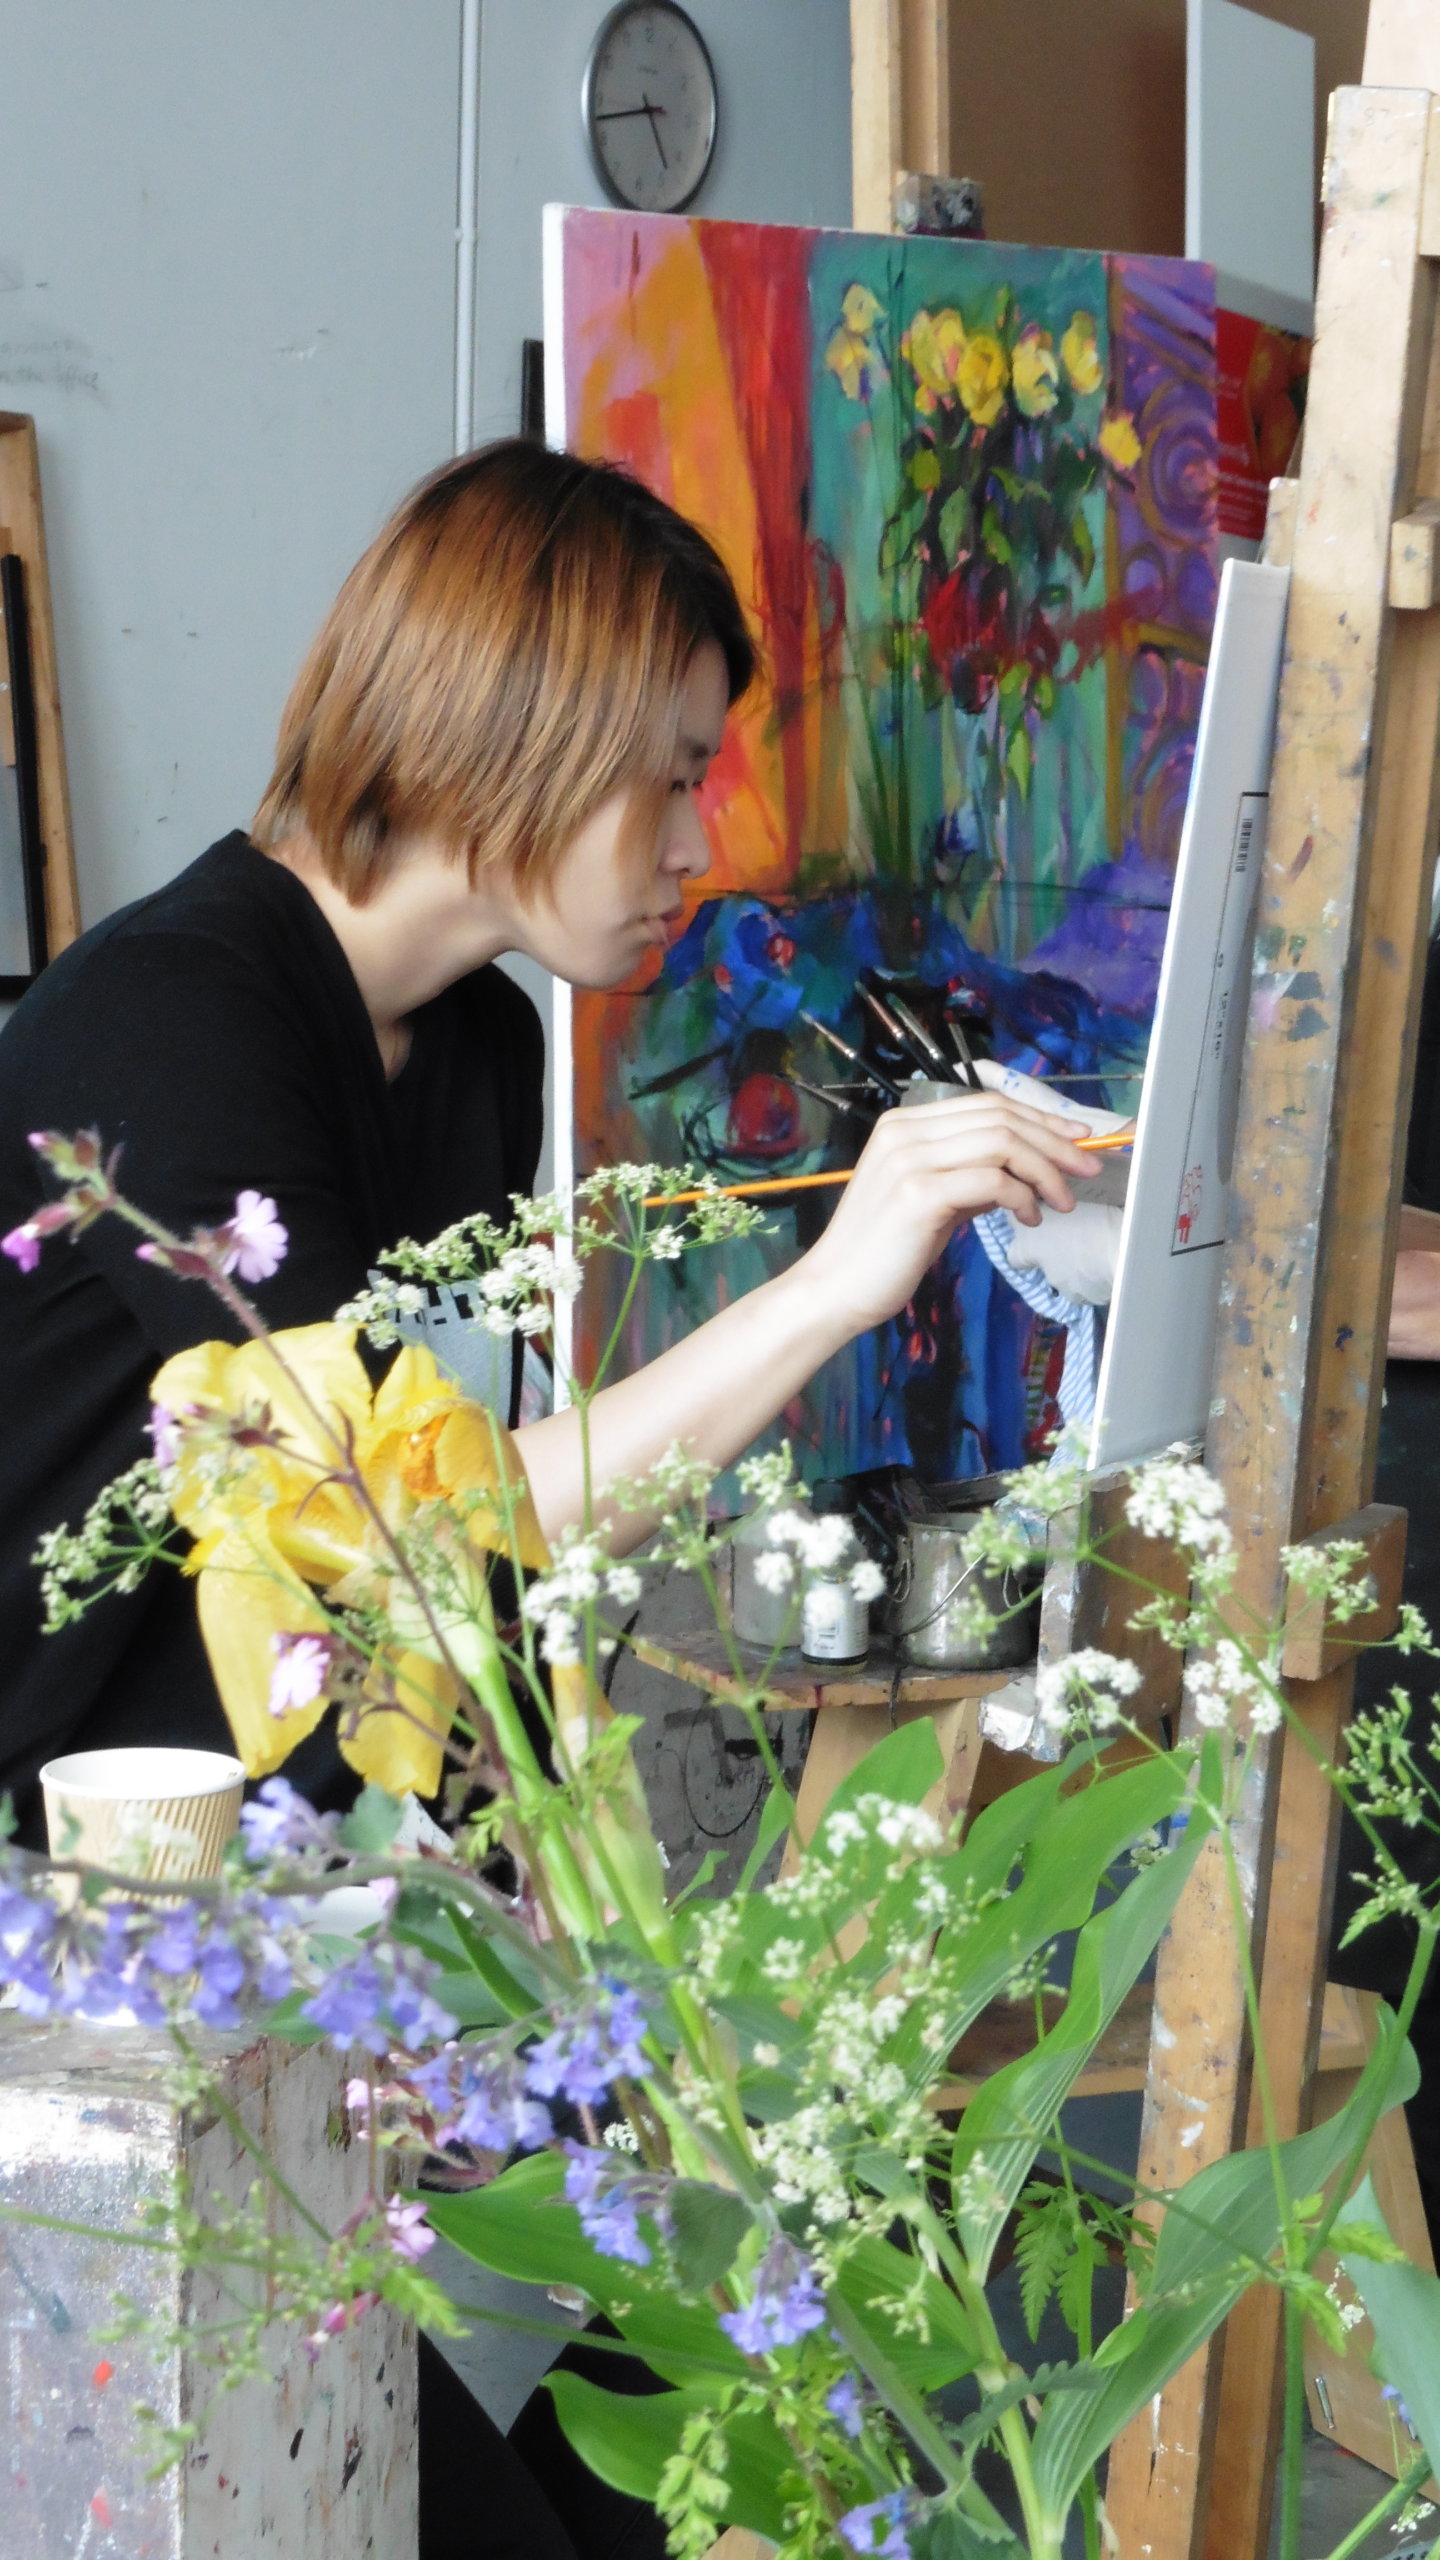 Student painting in a studio at Heatherleys.